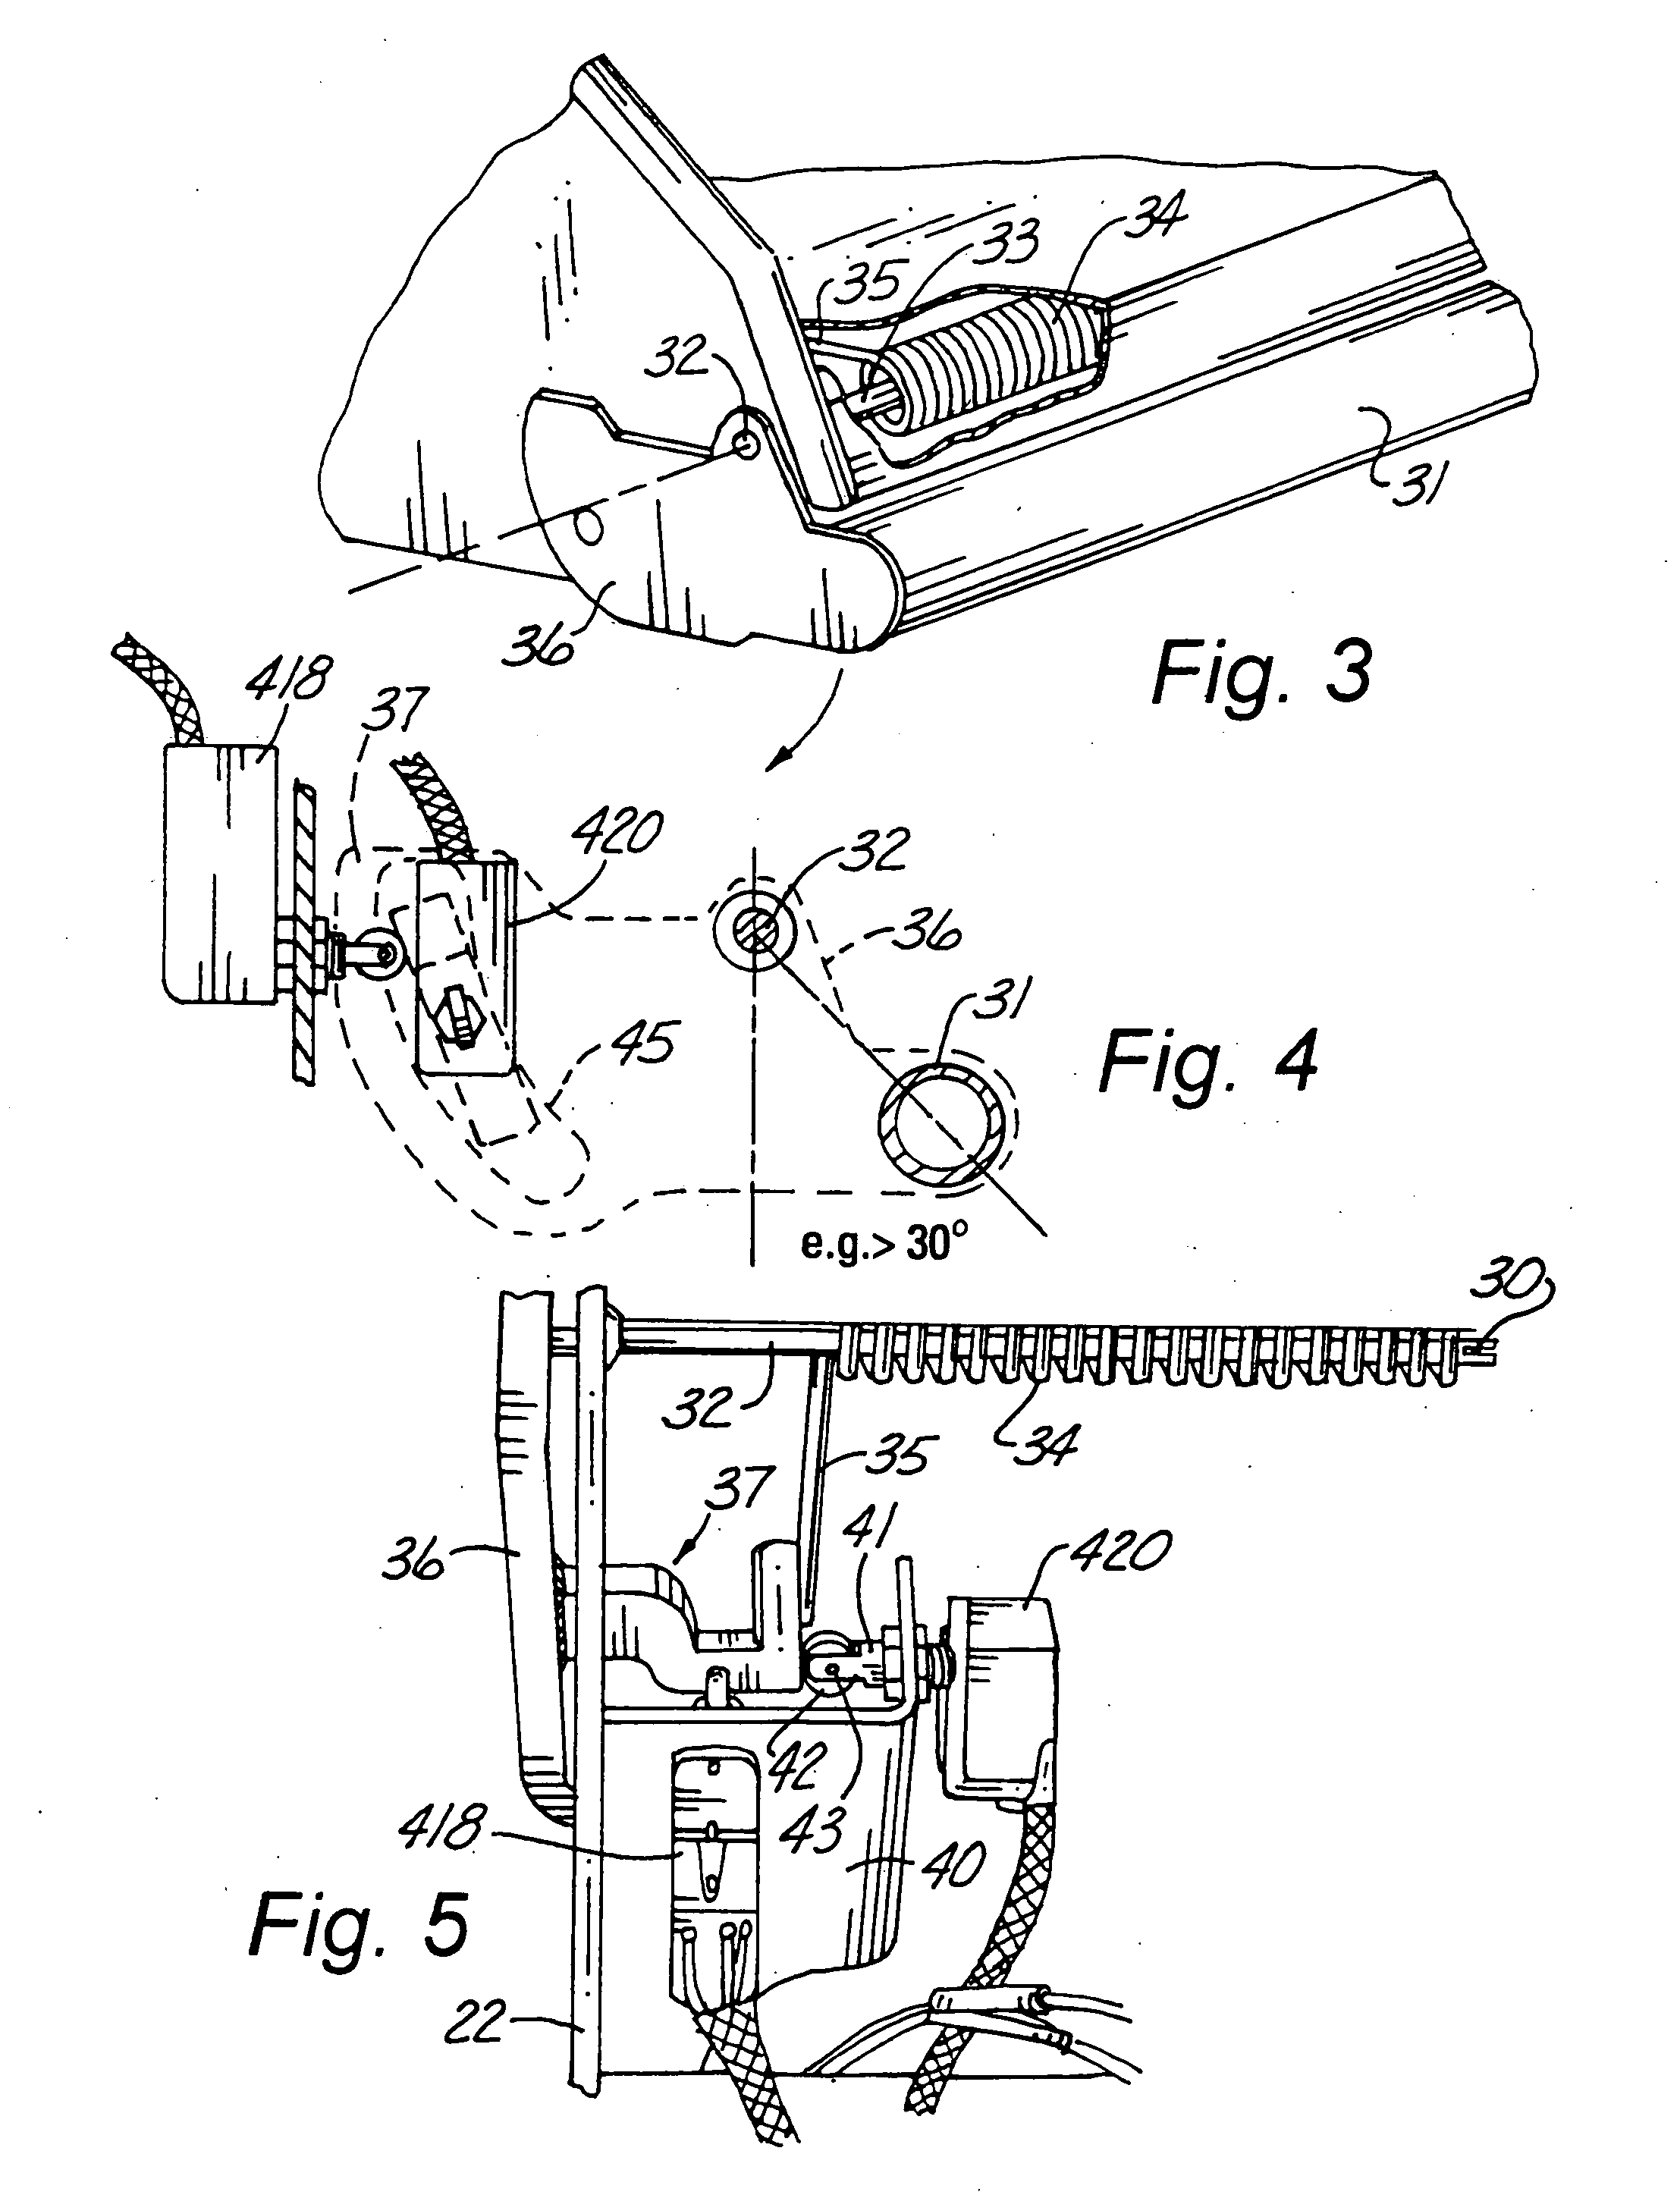 Brush chipper and methods of operating same